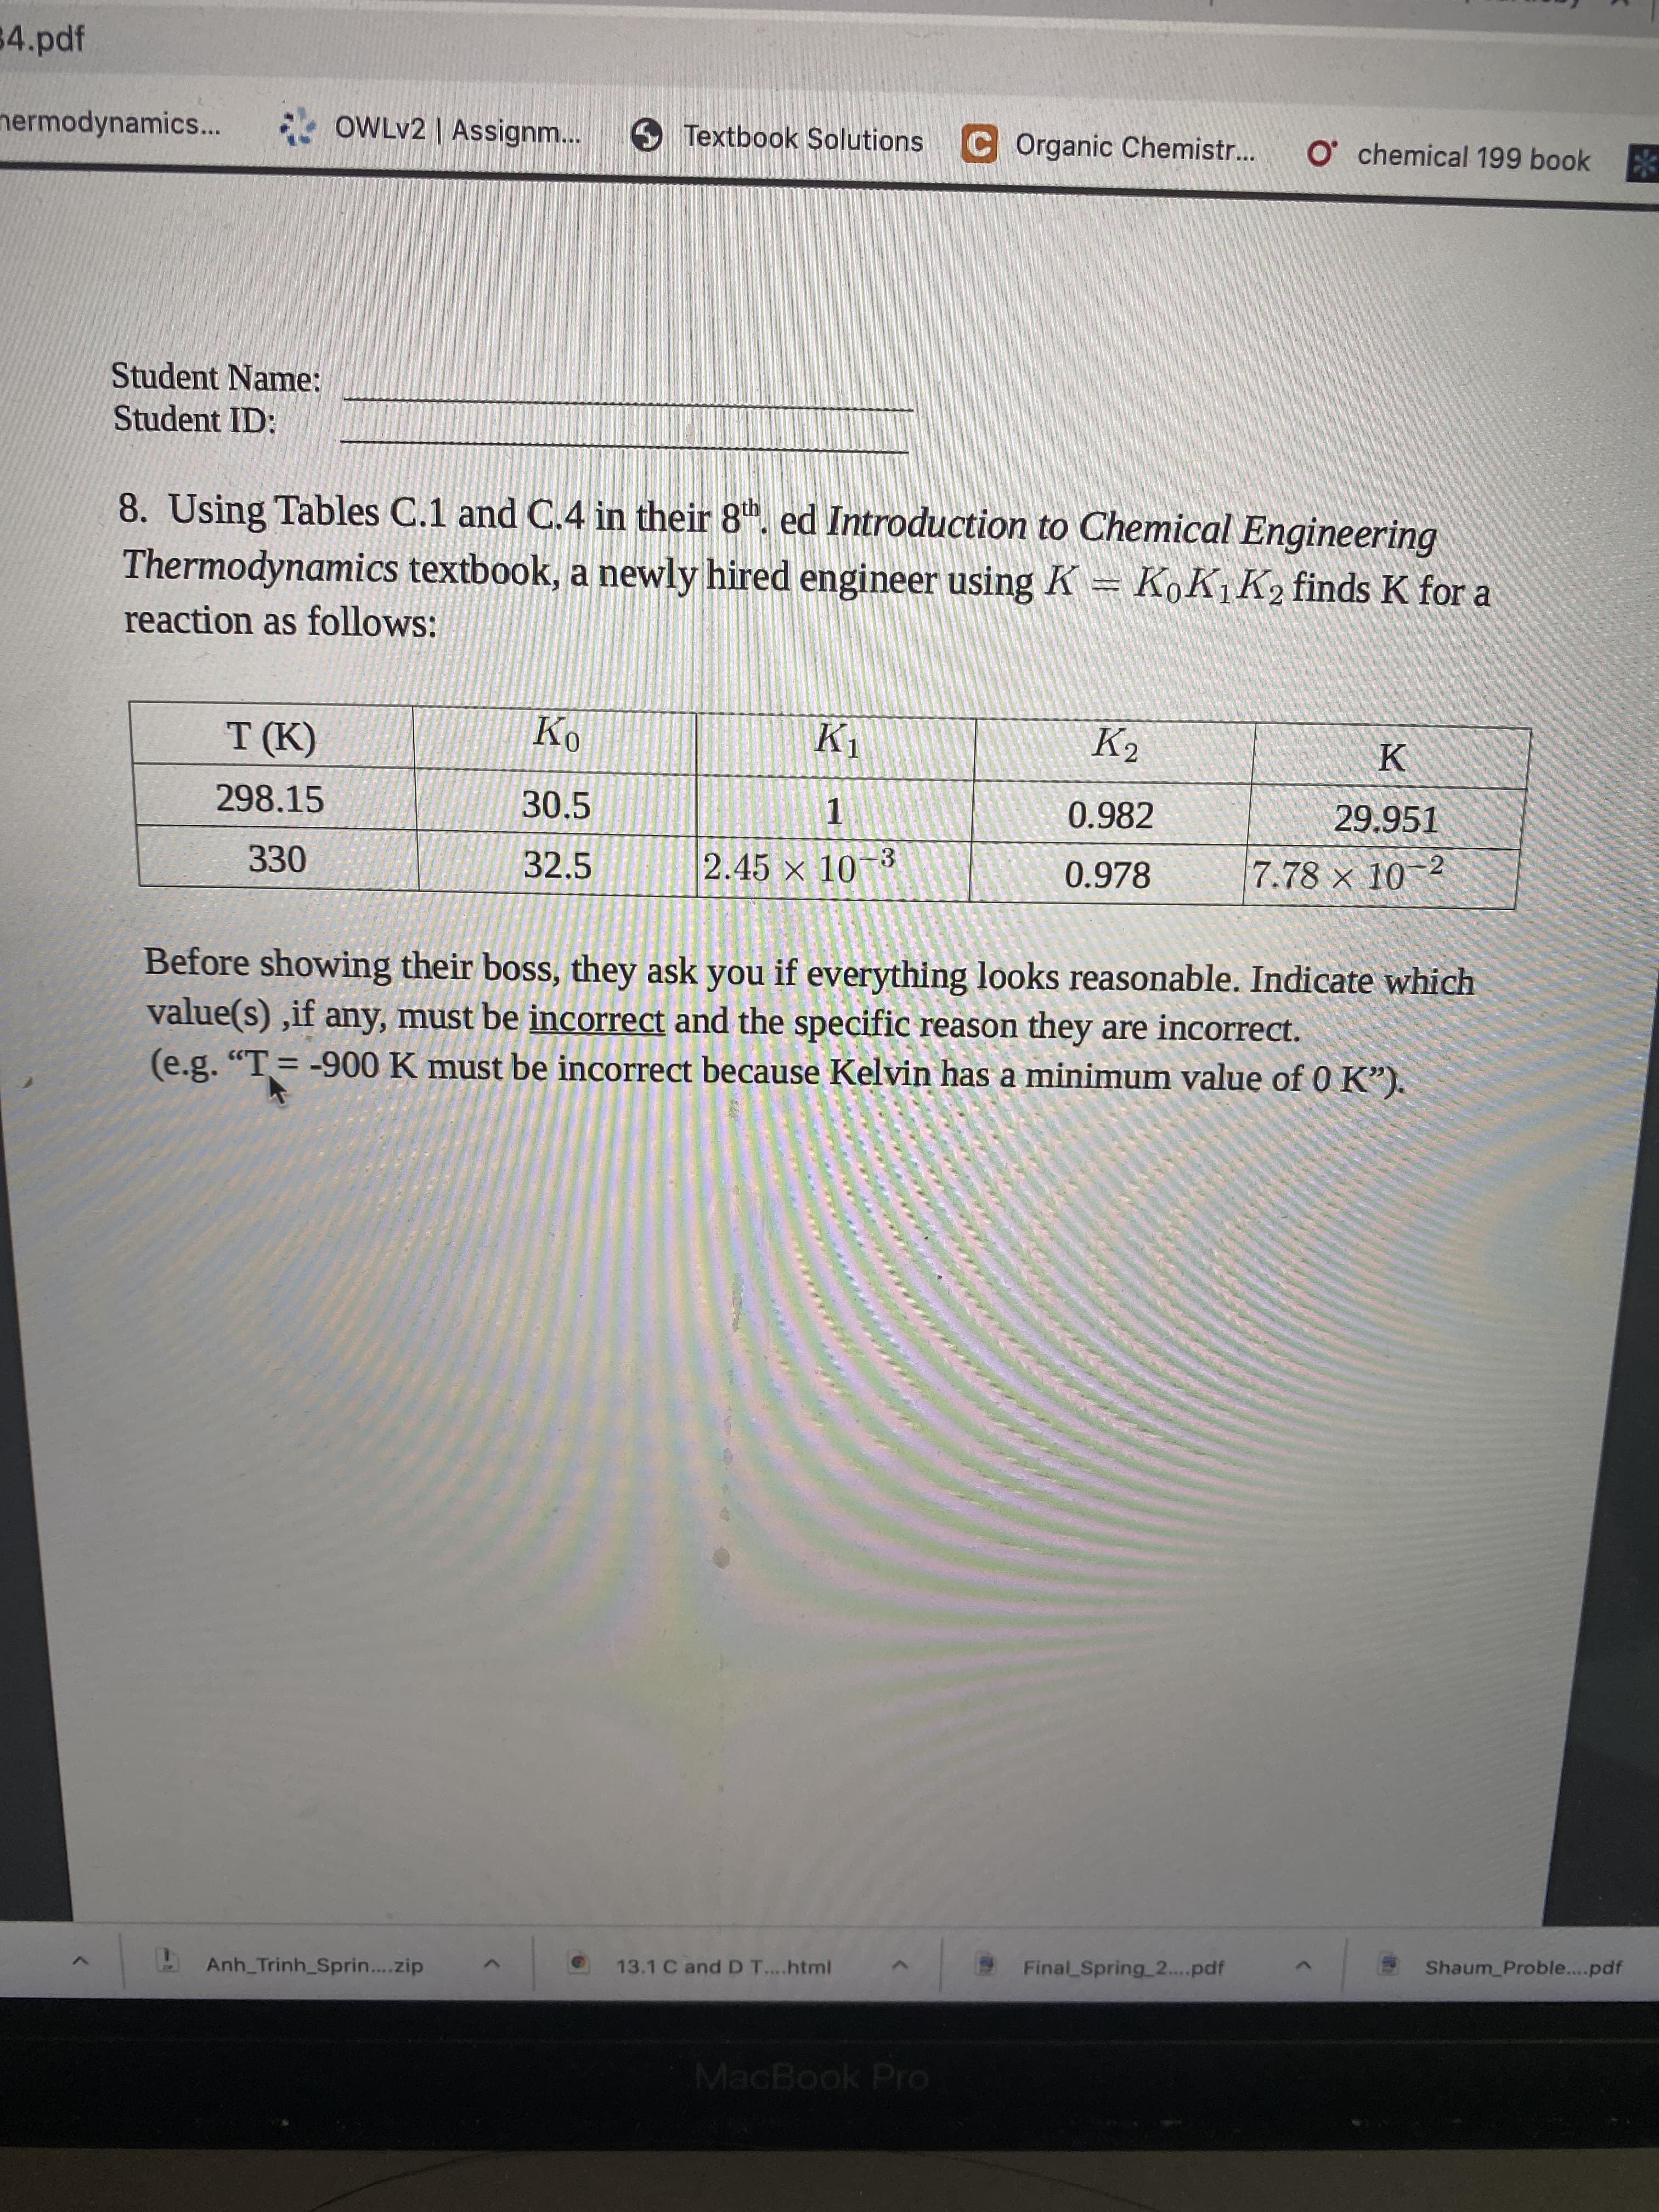 8. Using Tables C.1 and C.4 in their 8h. ed Introduction to Chemical Engineering
Thermodynamics textbook, a newly hired engineer using K = K,K1K2 finds K for a
reaction as follows:
